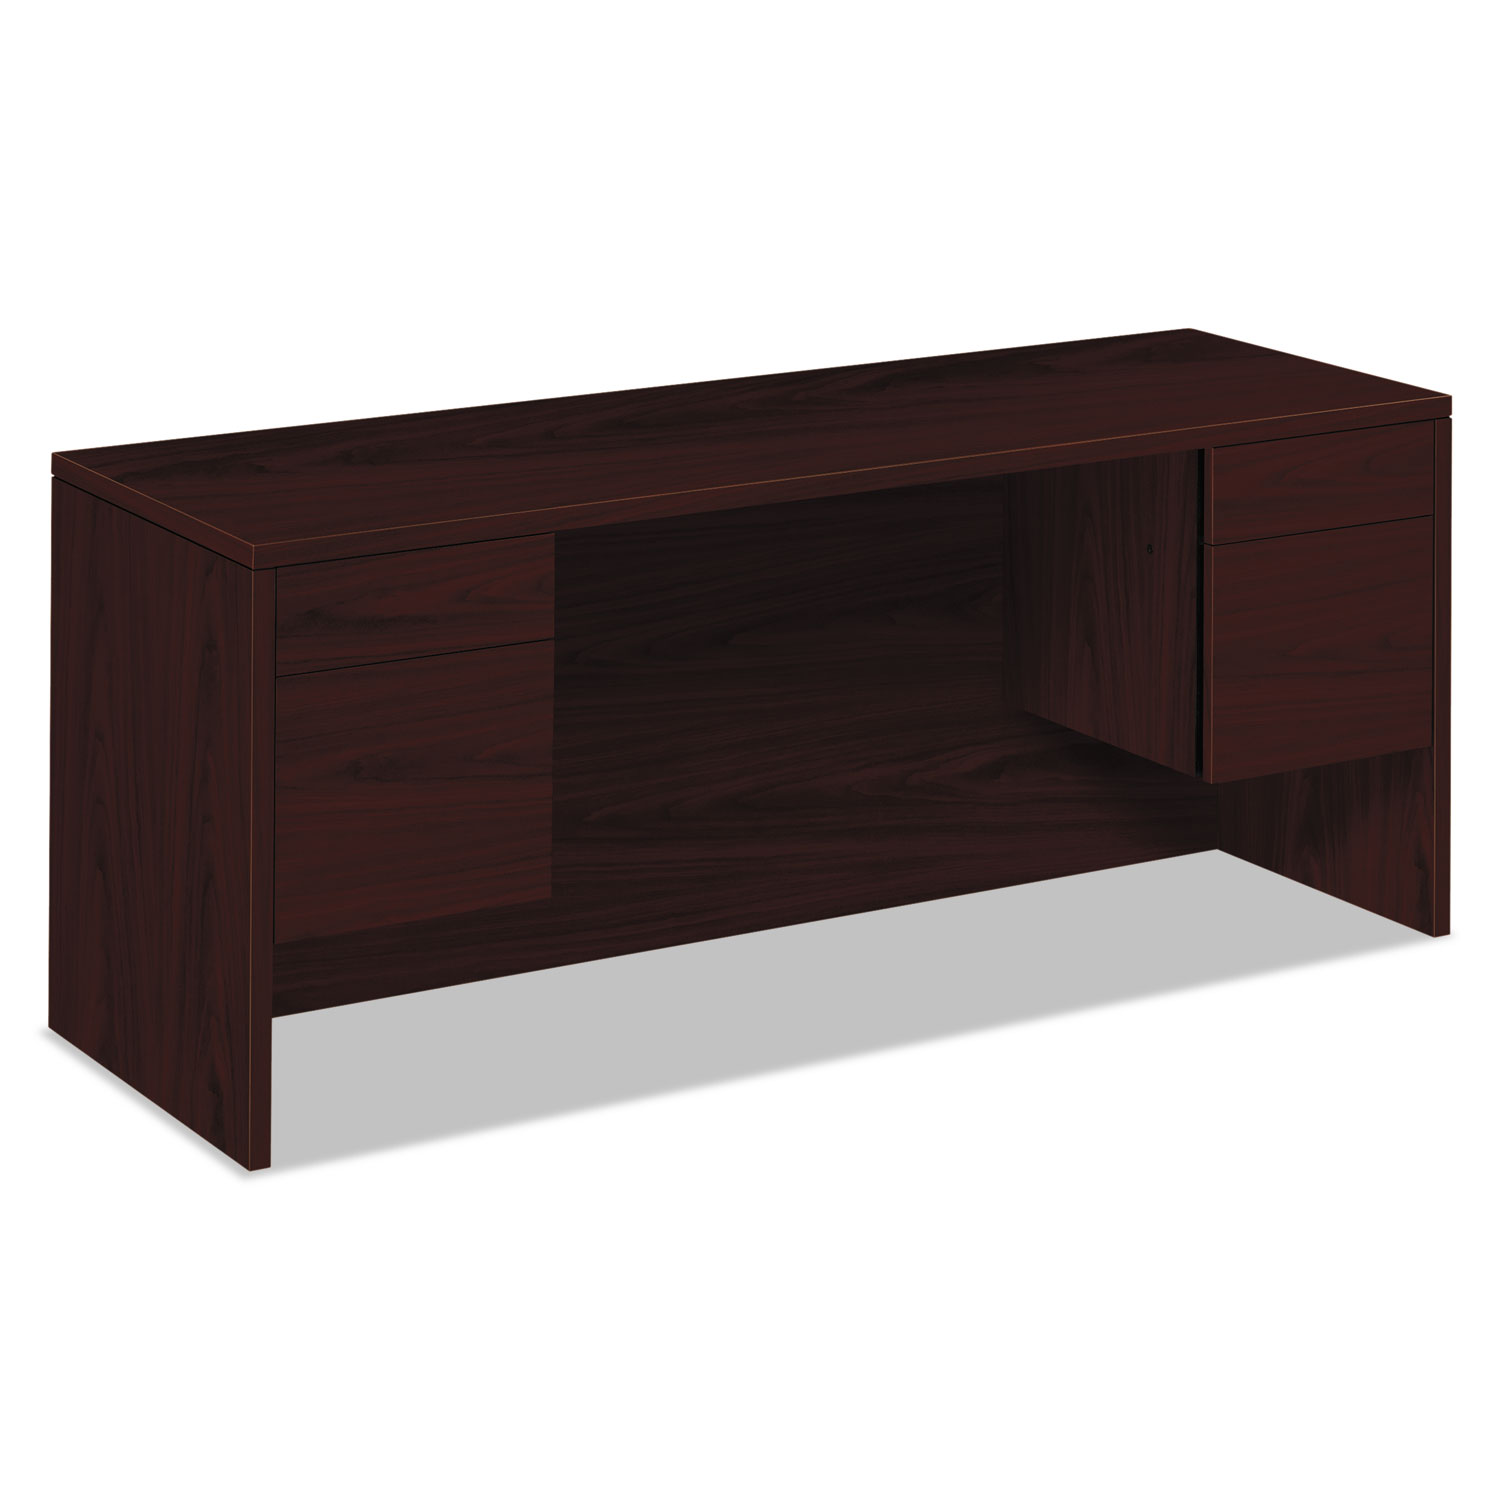 10500 Series Kneespace Credenza With 3/4-Height Pedestals, 72 x 24, Mahogany